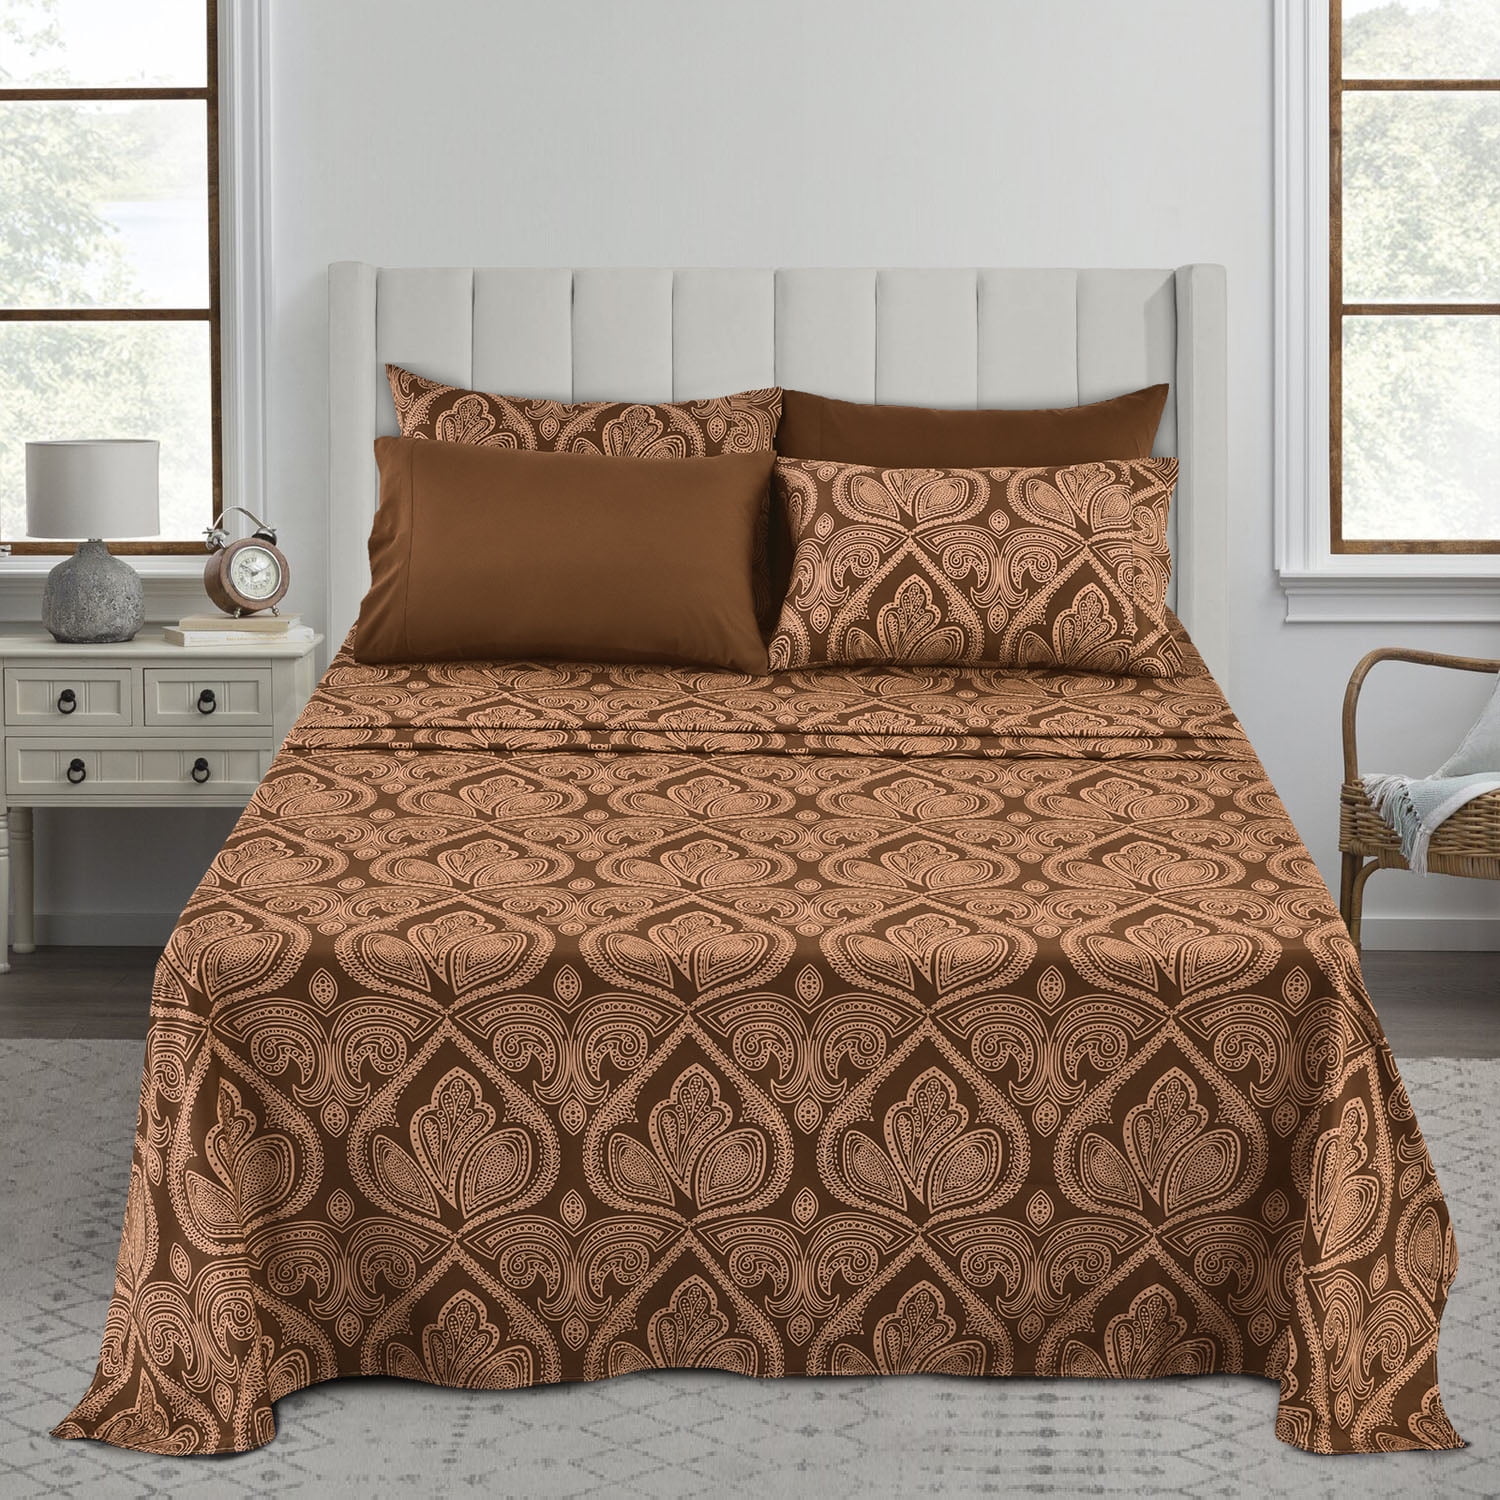 Details about   Fabulous Bedding Items Ivory Solid Deep Pocket Egyptian Cotton All US Size 